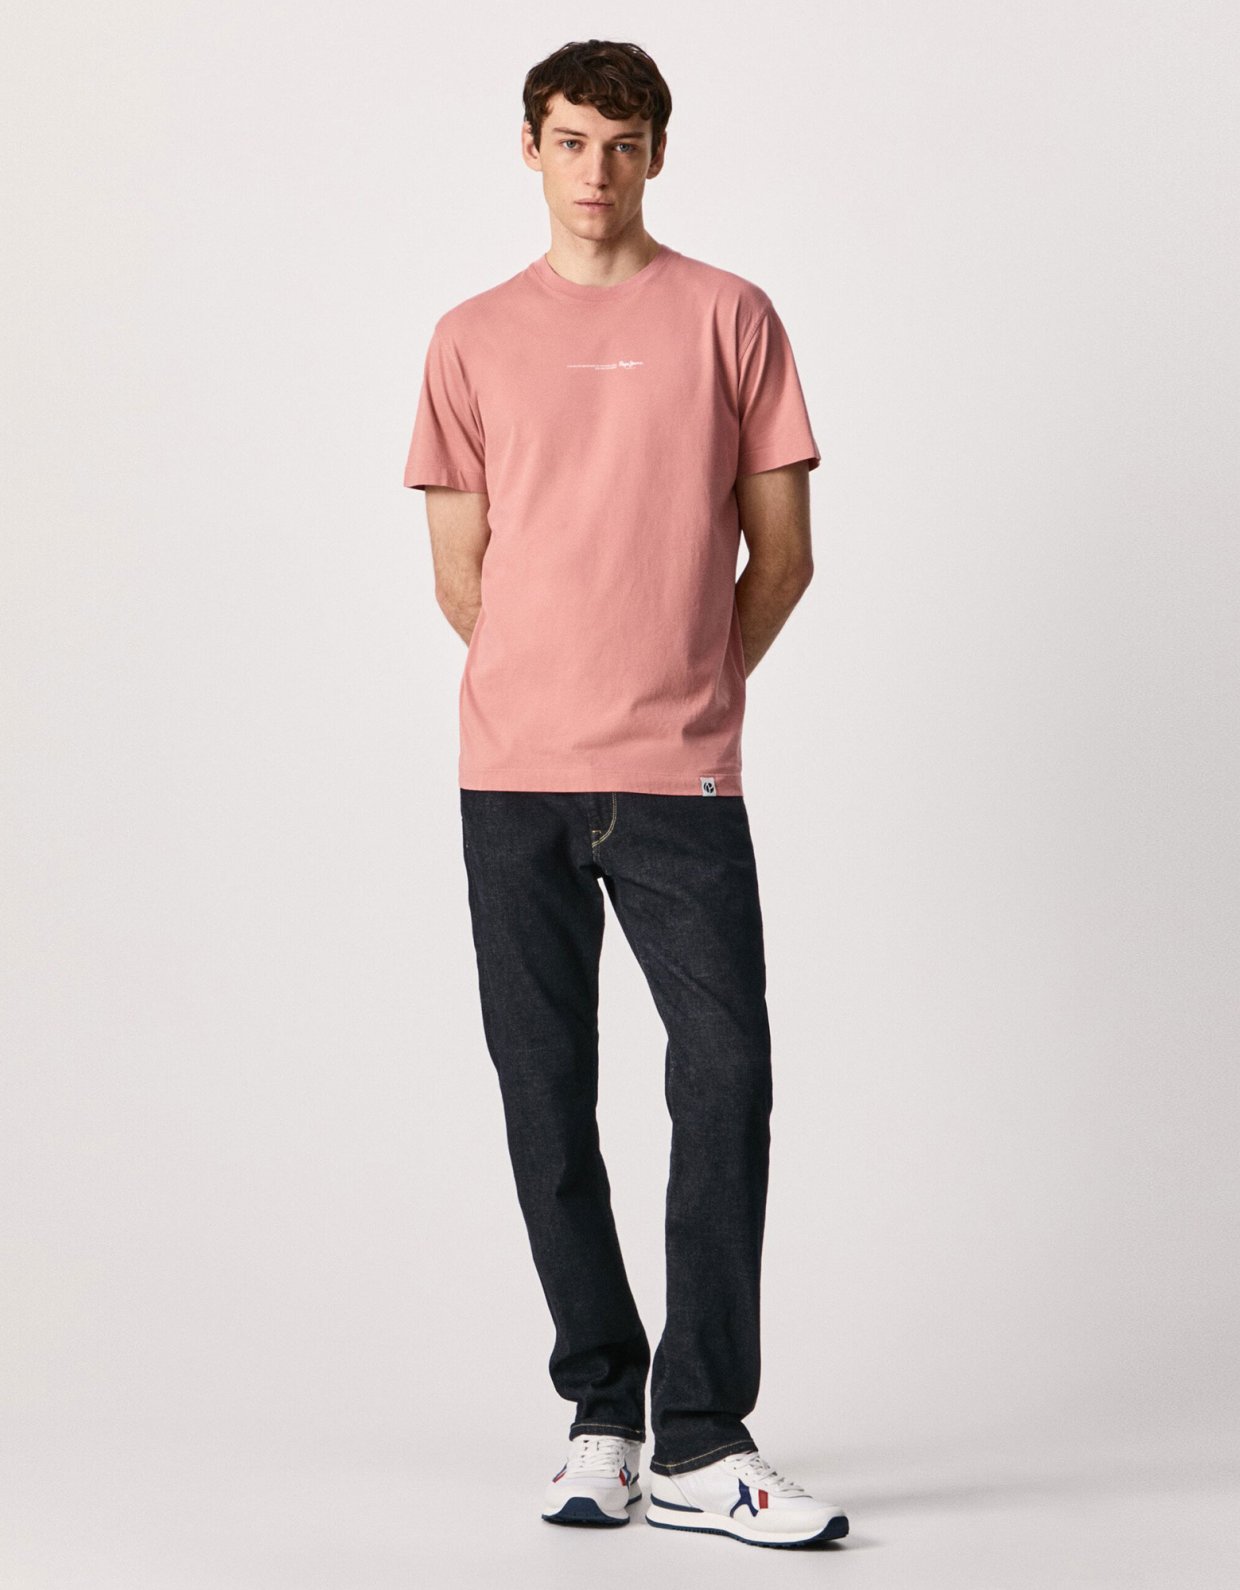 Pepe Jeans Andreas t-shirt claret